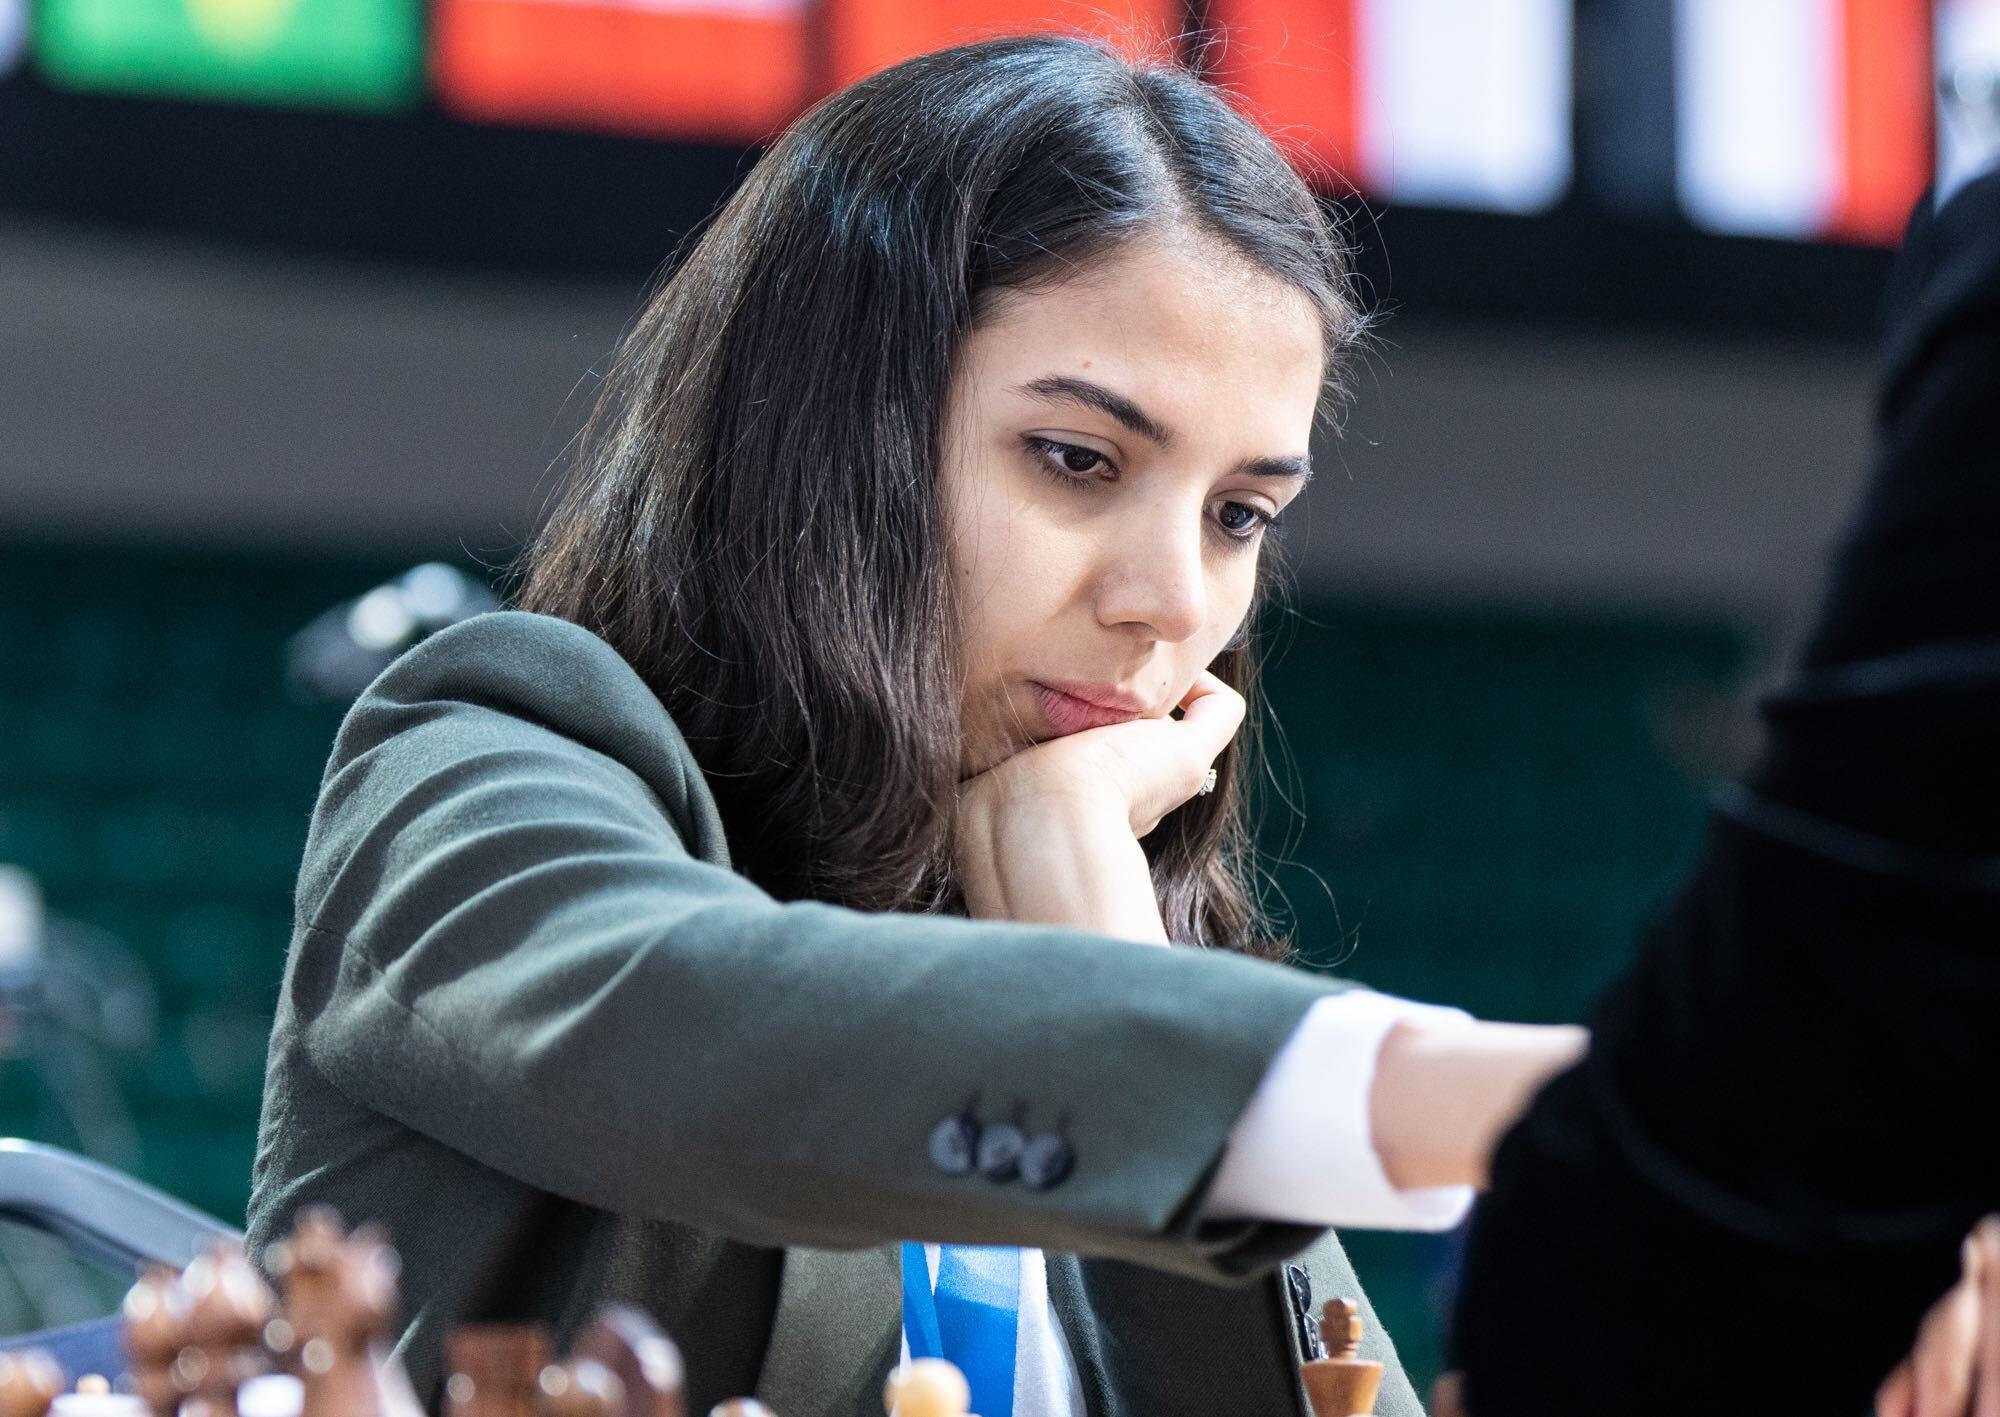 Exiled Iranian chess player says not herself with hijab